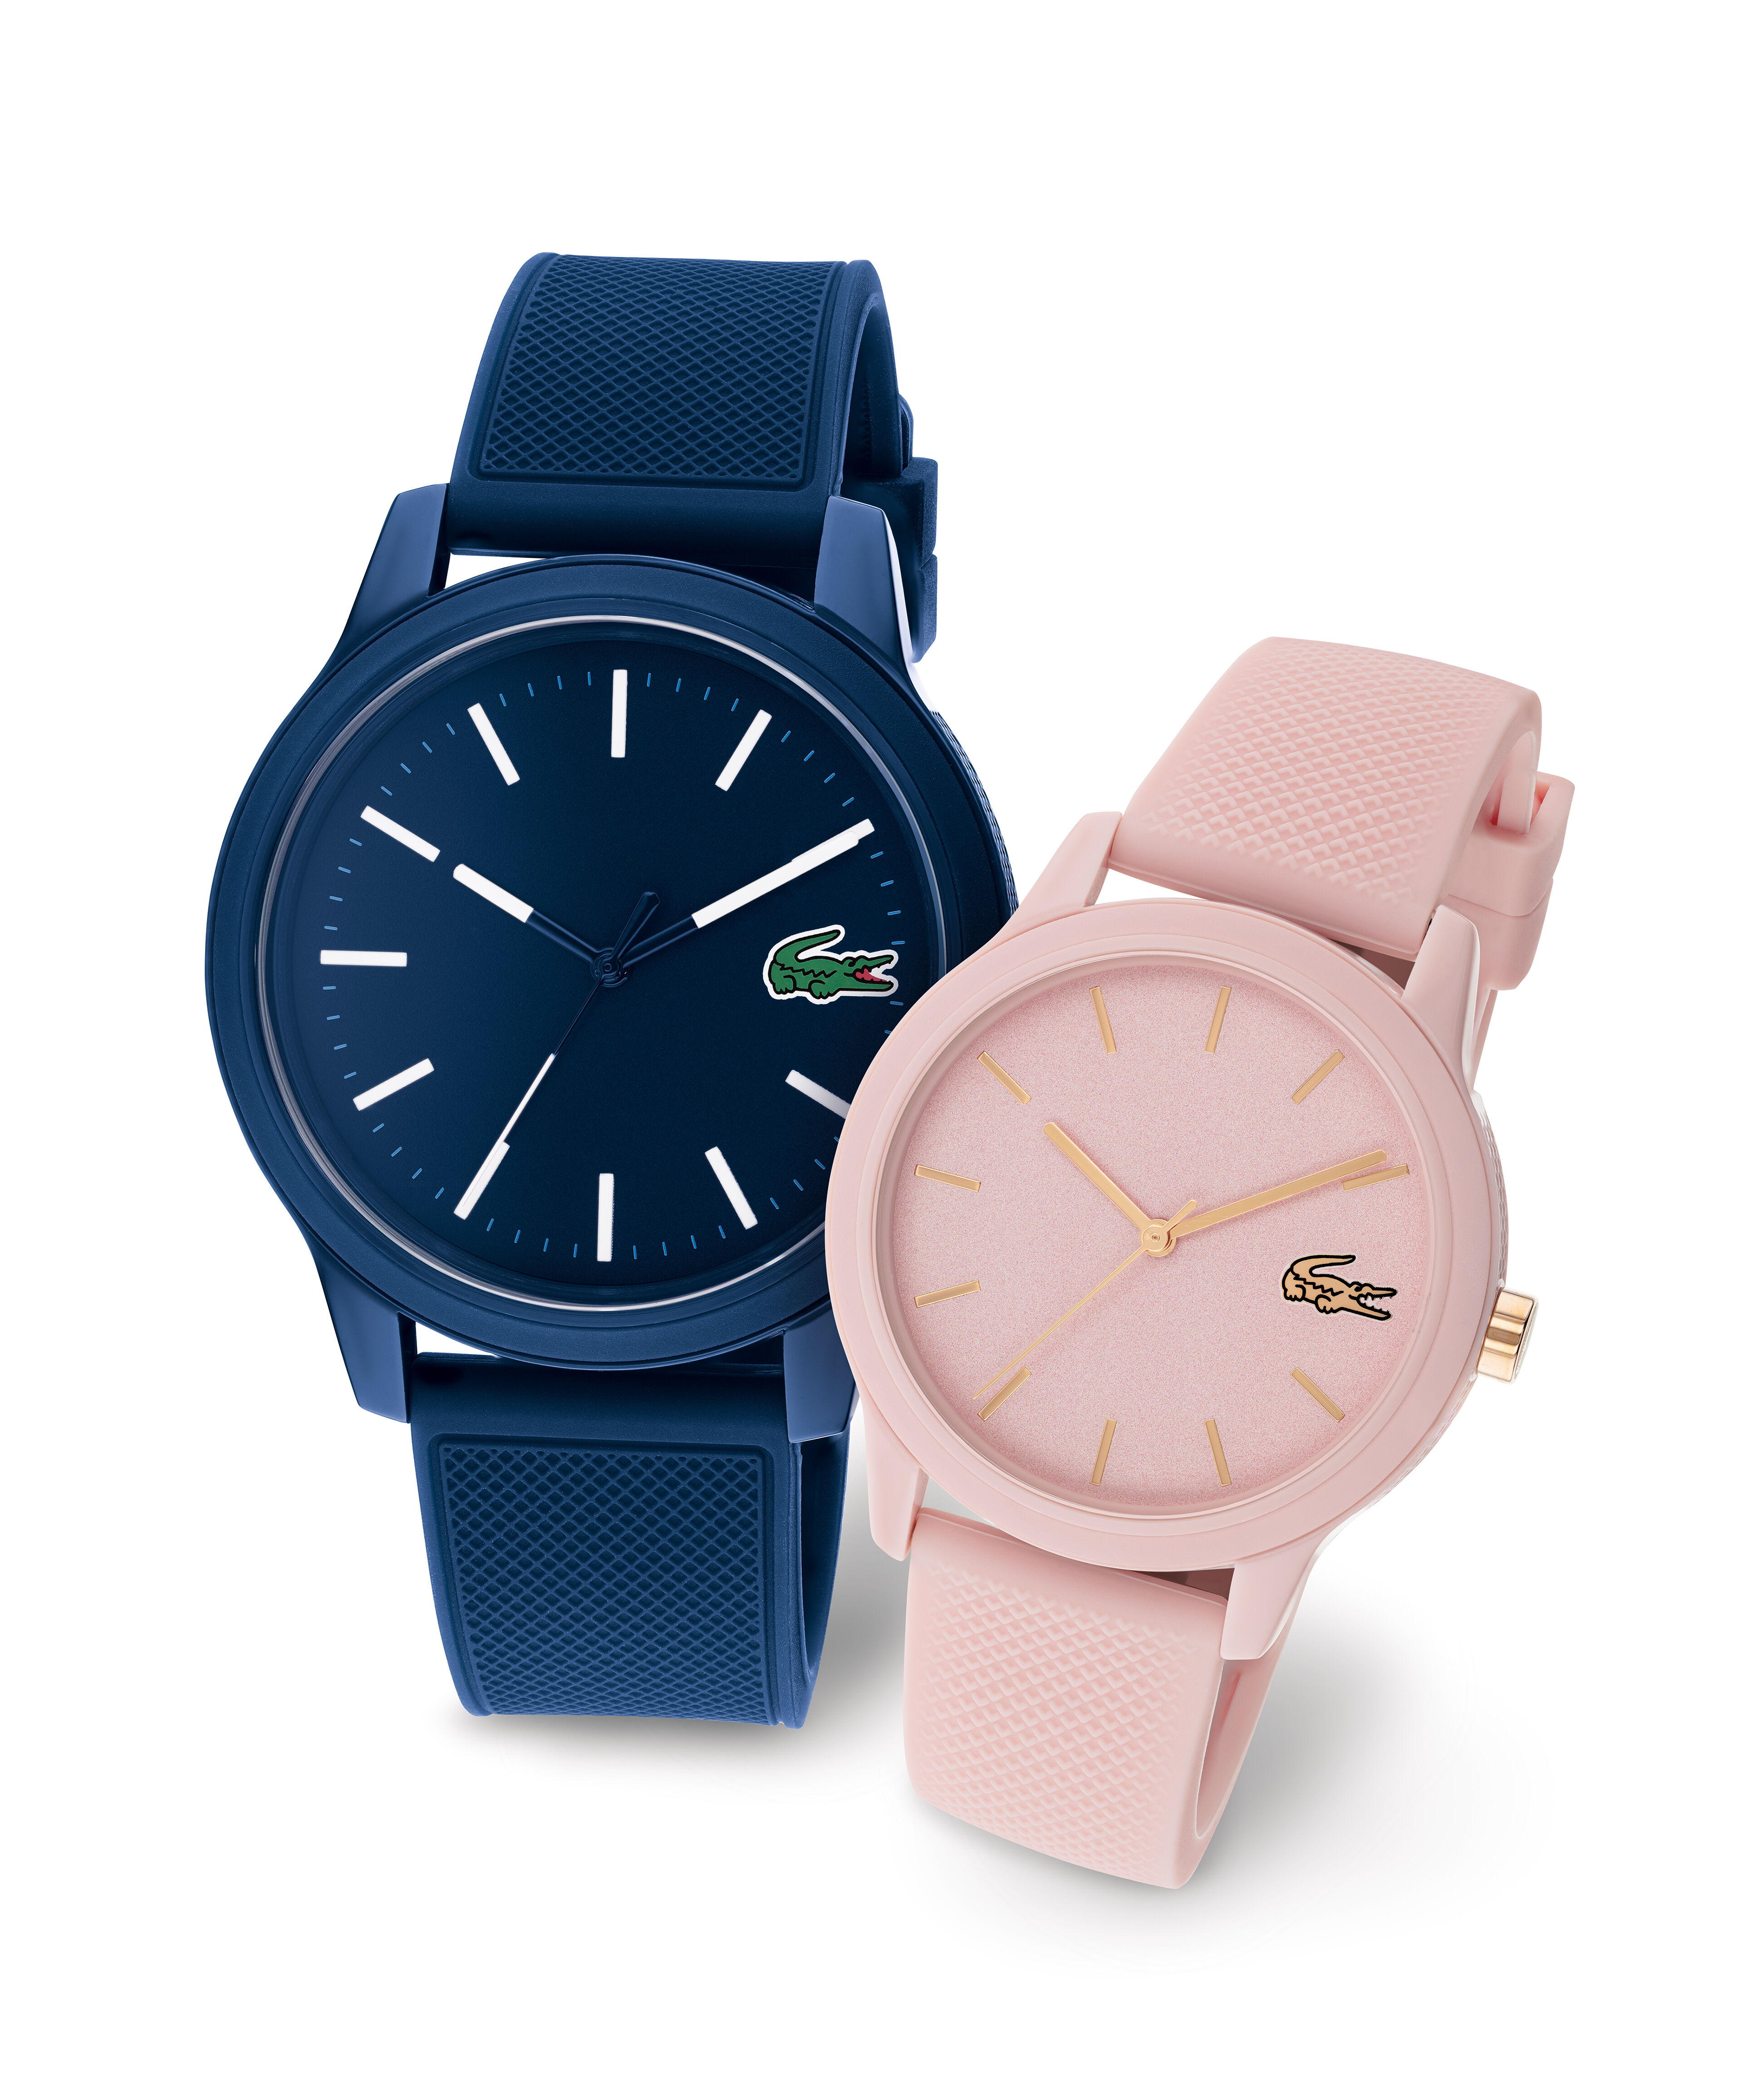 Buy Couple Watches Online at Best Prices in India at Tata CLiQ